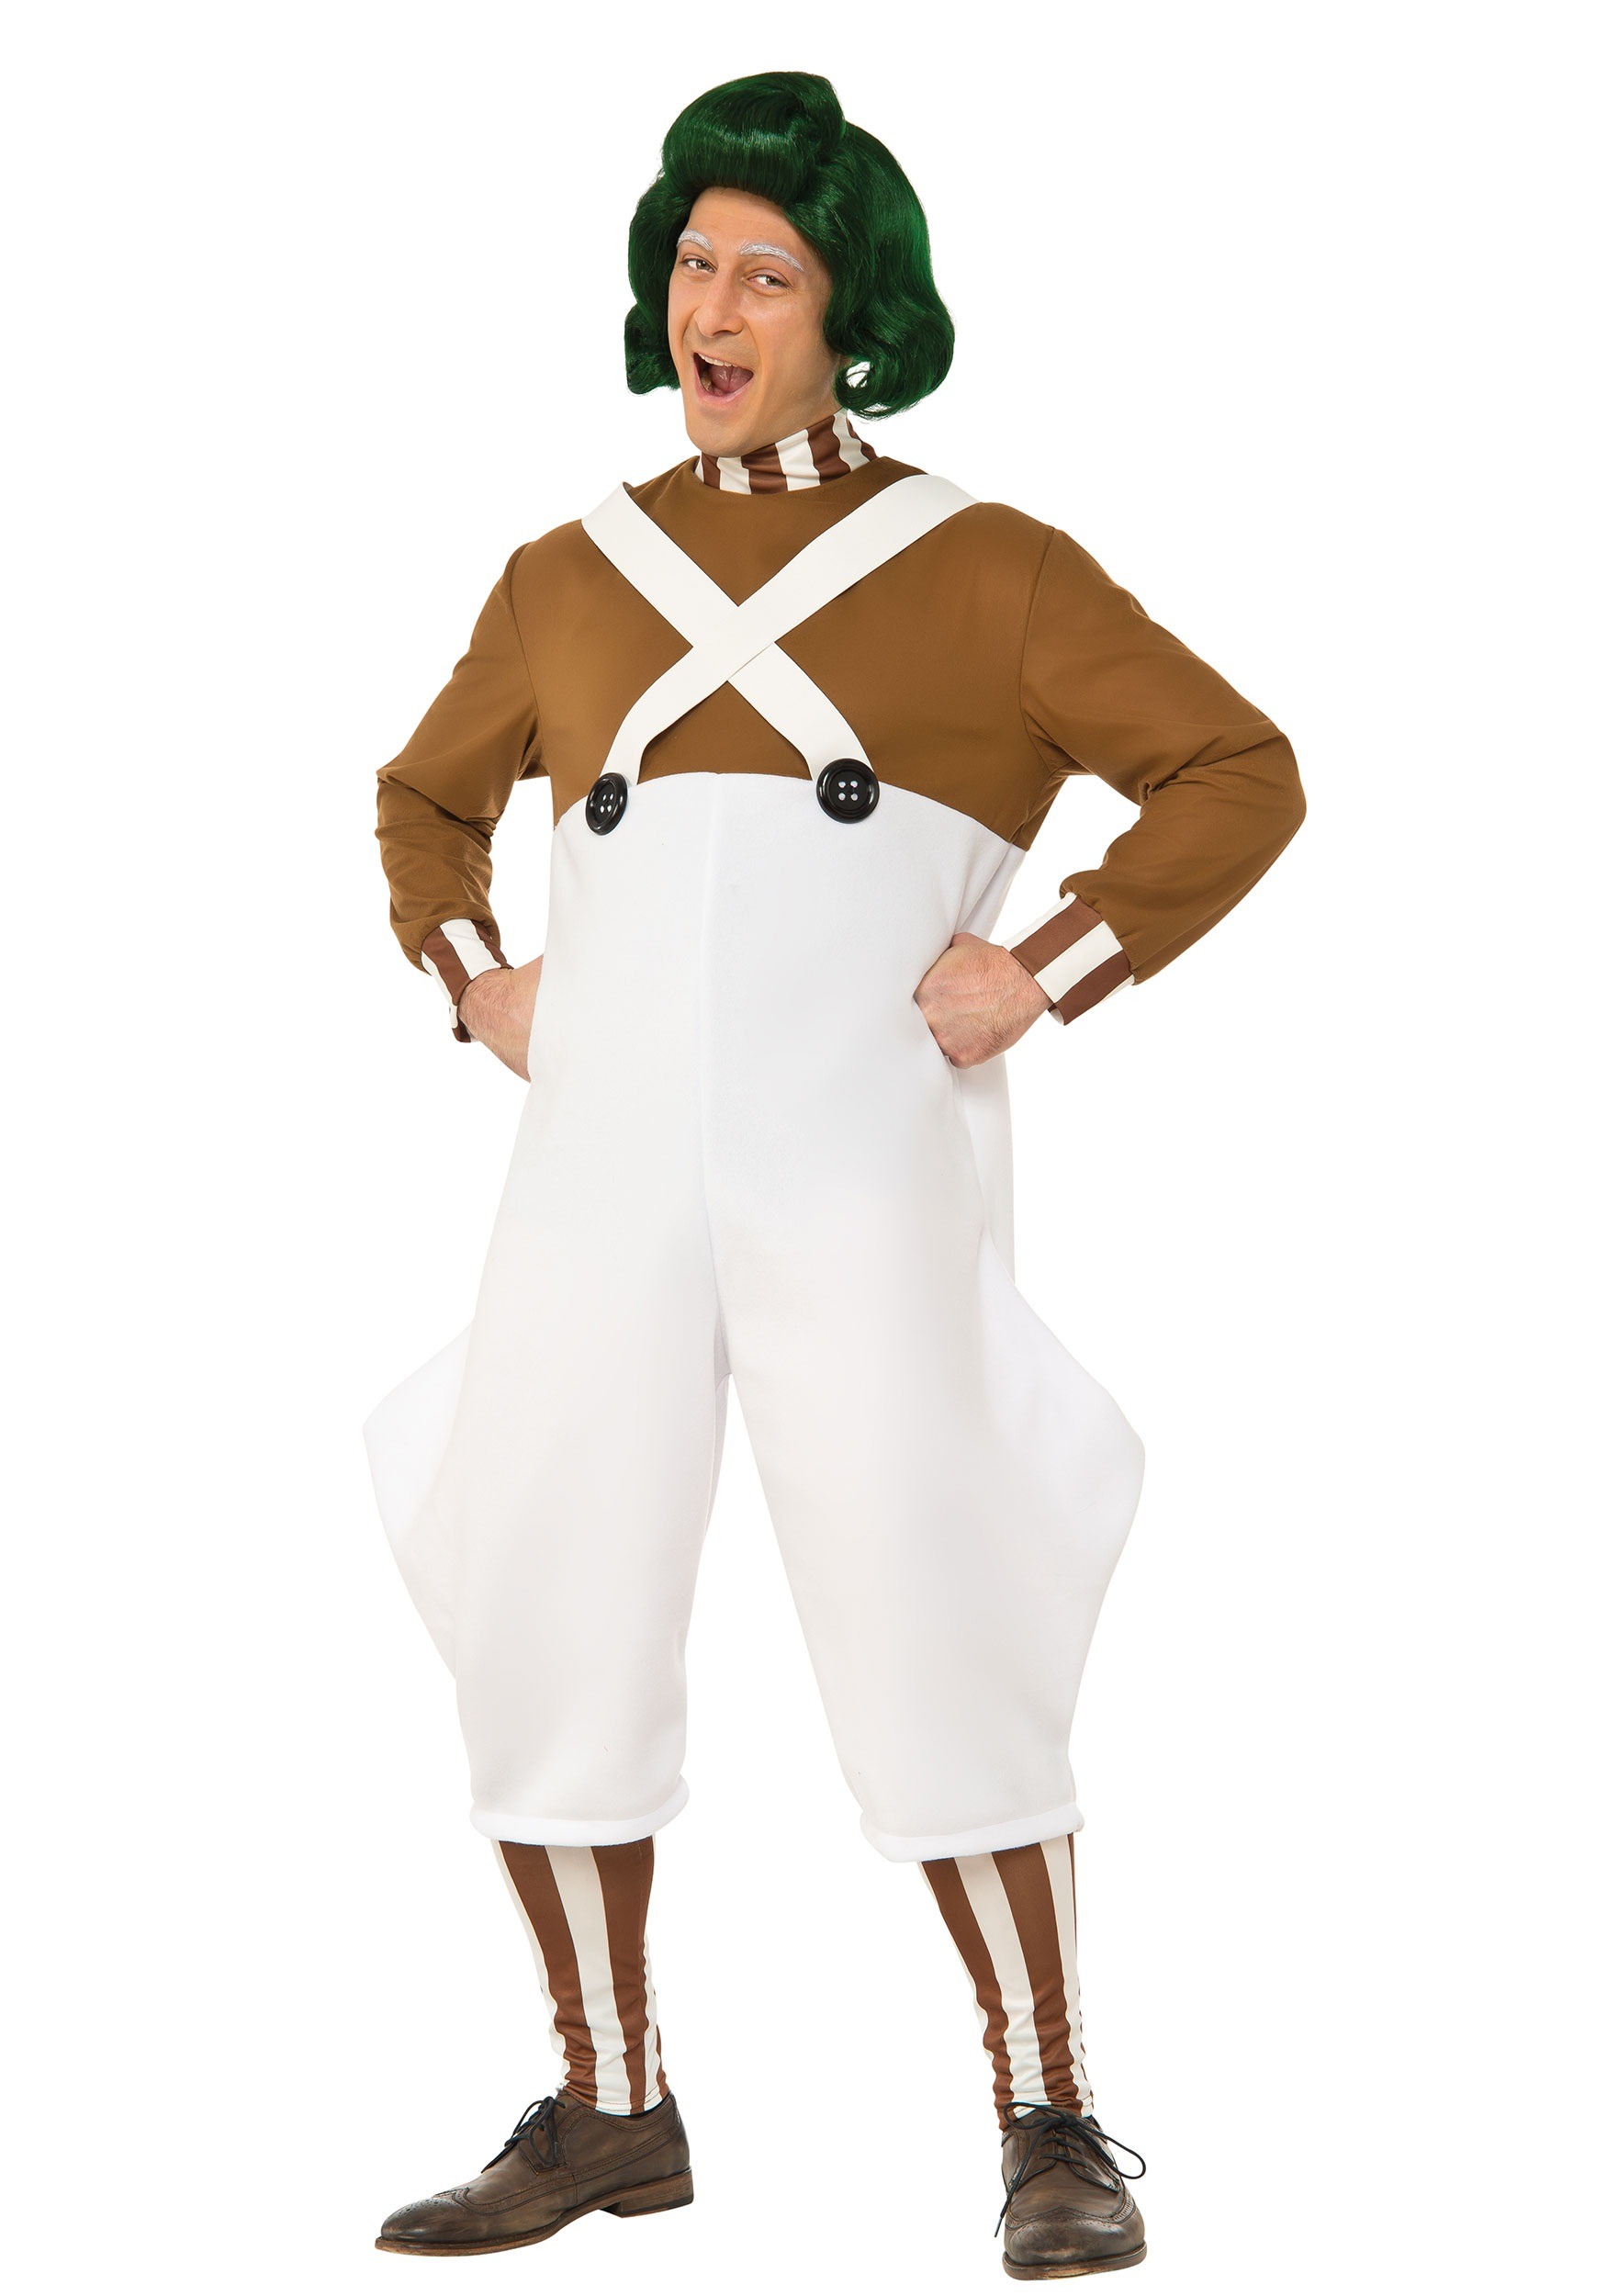 Photos - Fancy Dress Rubies Costume Co. Inc Deluxe Men's Oompa Loompa Costume Brown/White R 